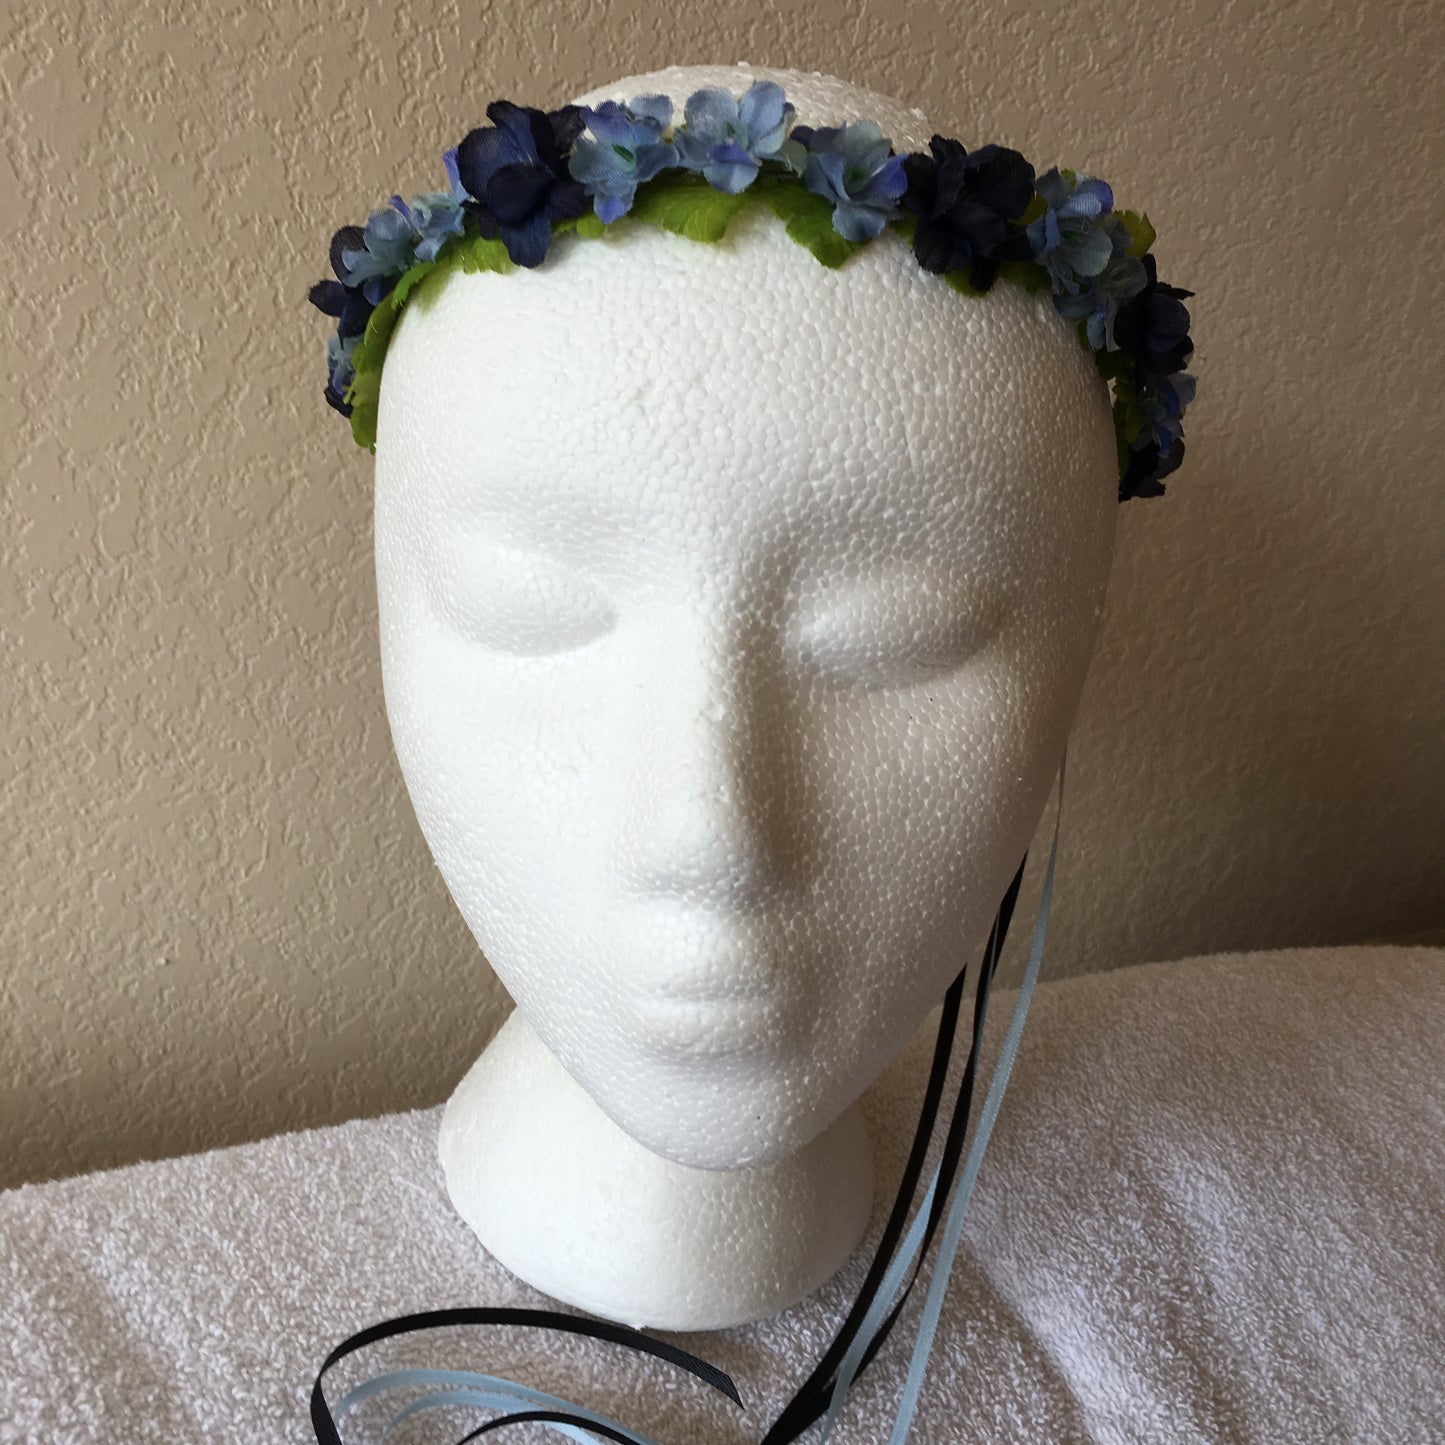 Extra Small Wreath - Navy blue & shades of blue mini flowers